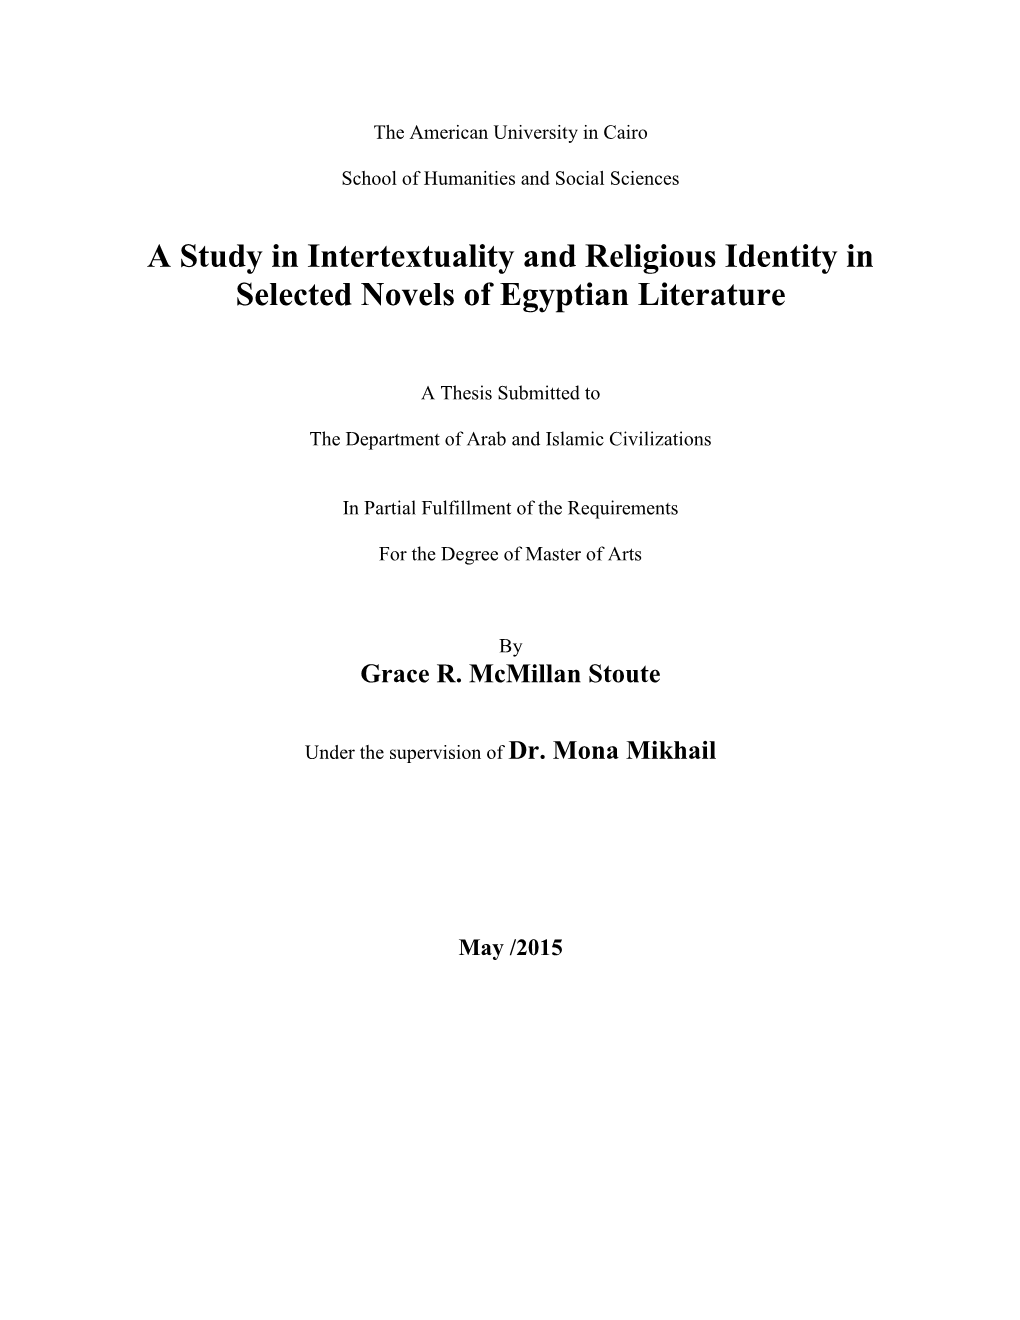 A Study in Intertextuality and Religious Identity in Selected Novels of Egyptian Literature